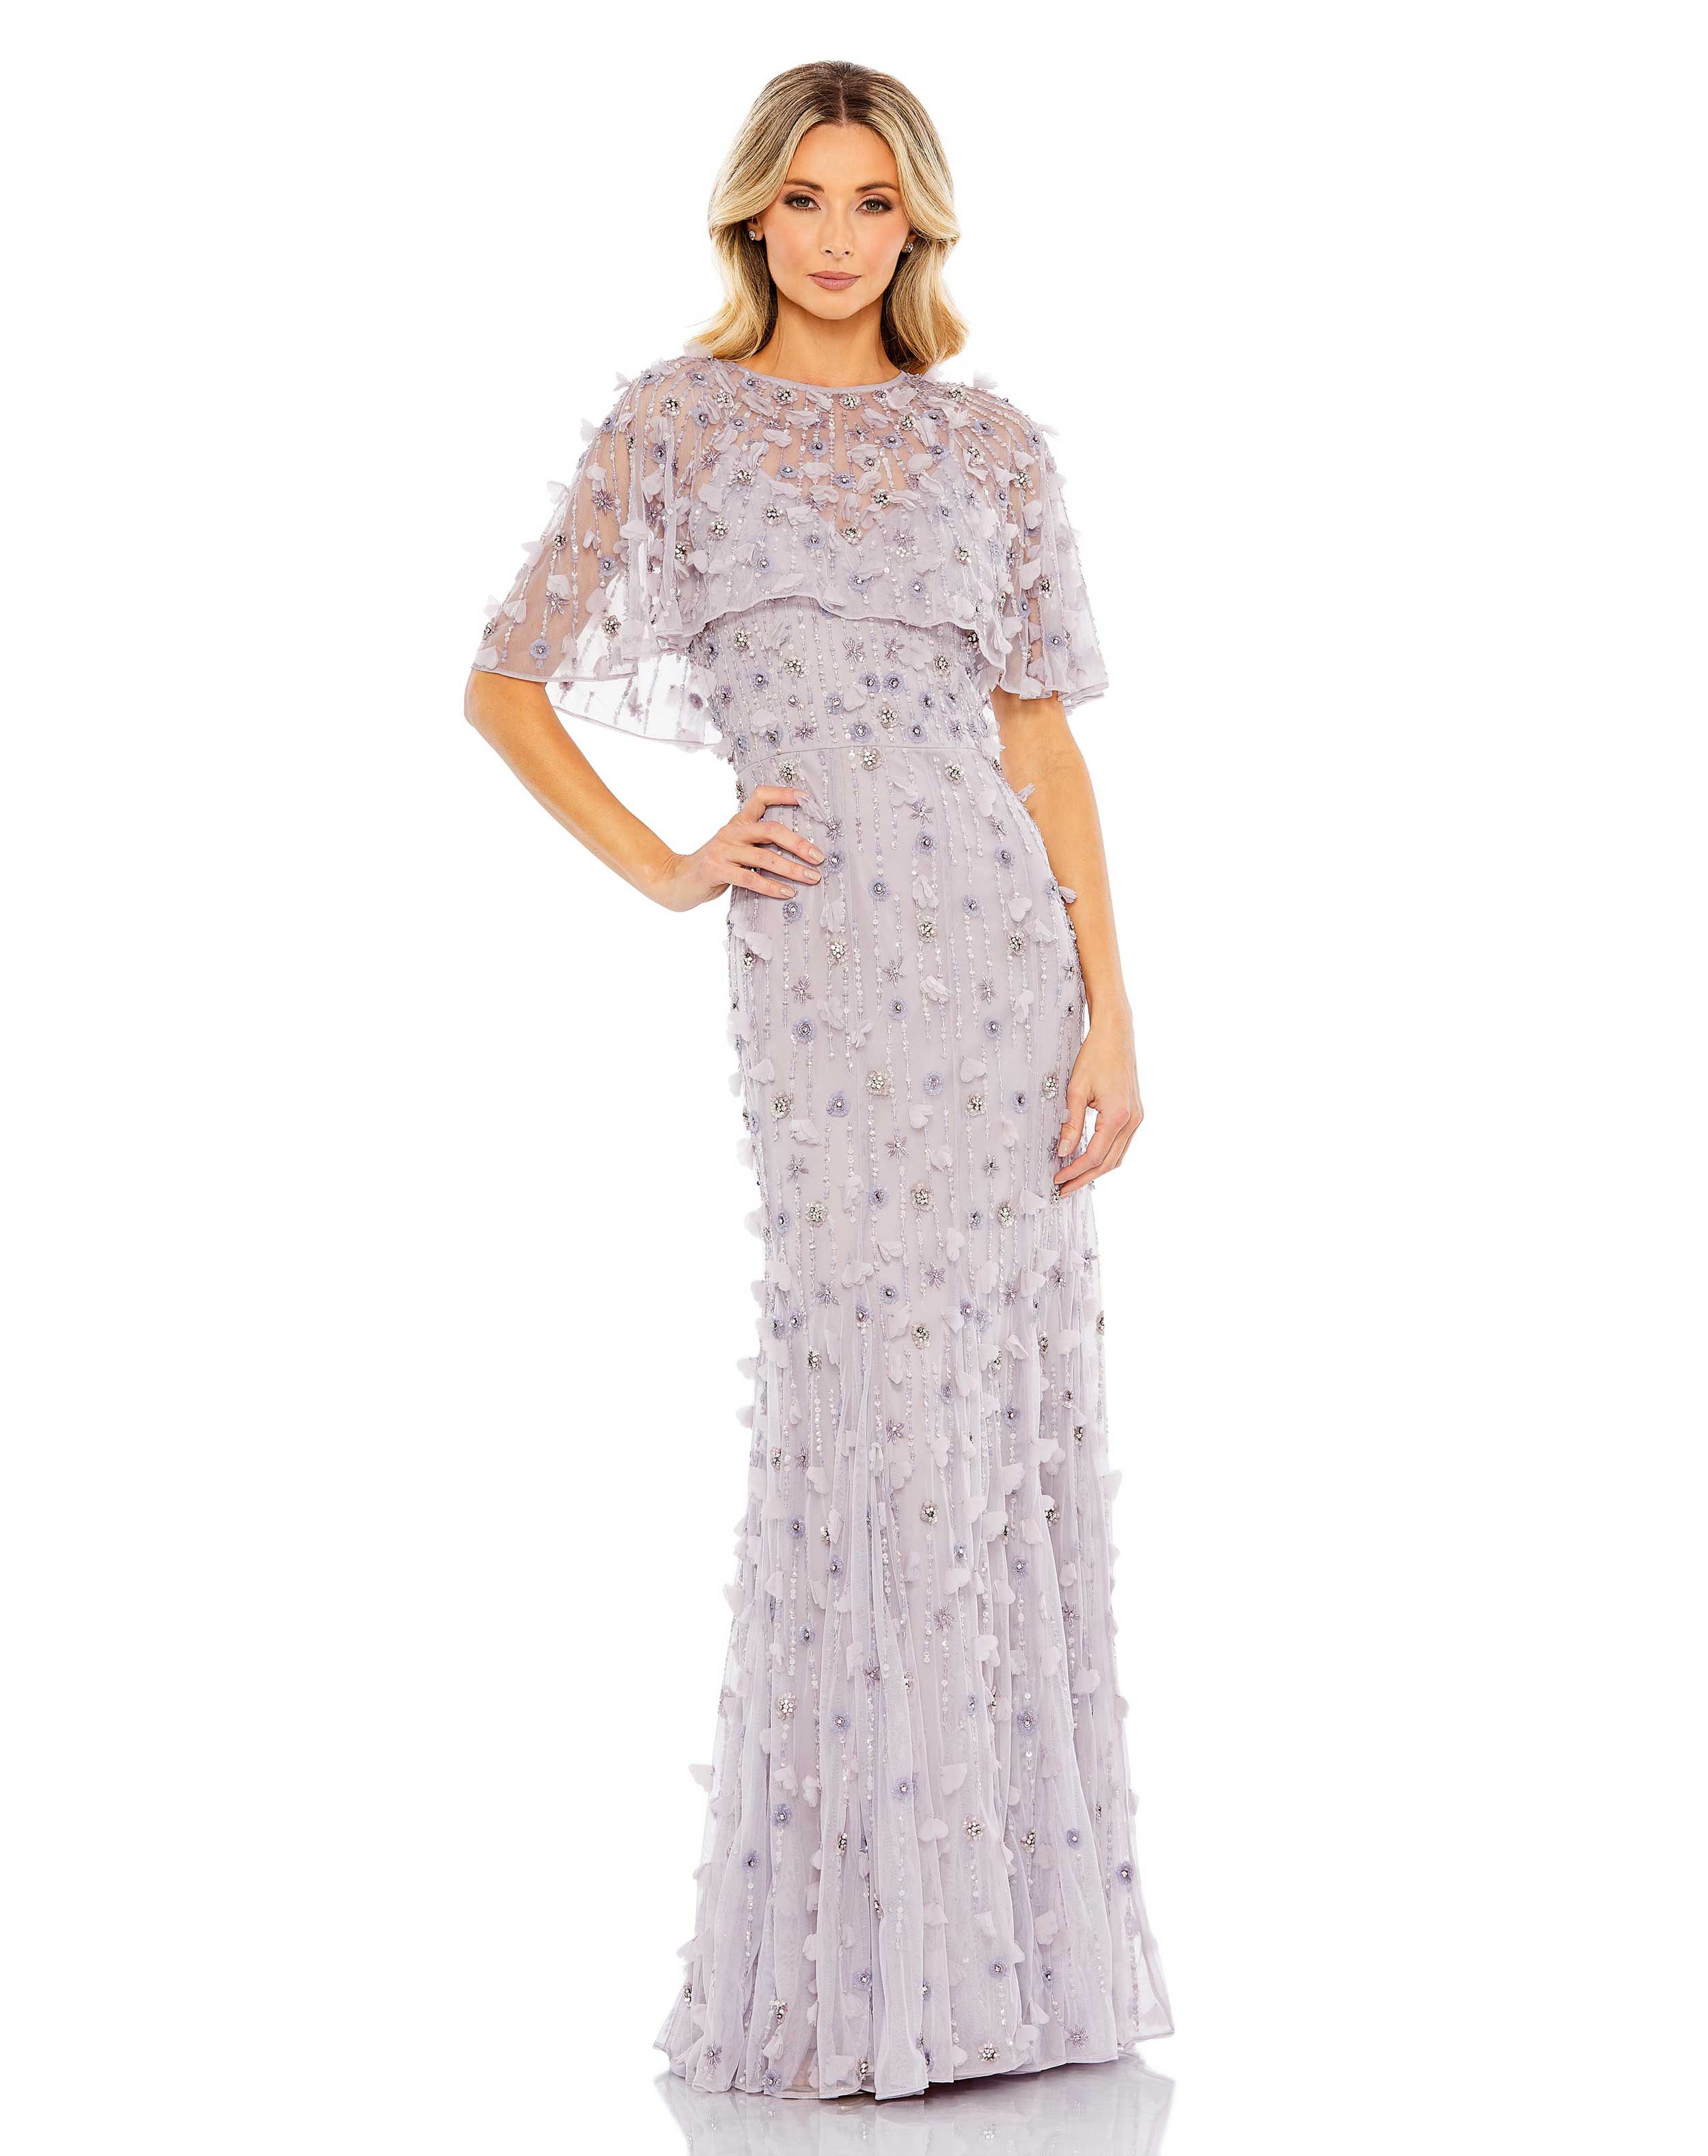 20+ Ideas Of Elegant Mother Of The Bride Dresses & Mother Of The Groom Gowns  - Papilio Boutique